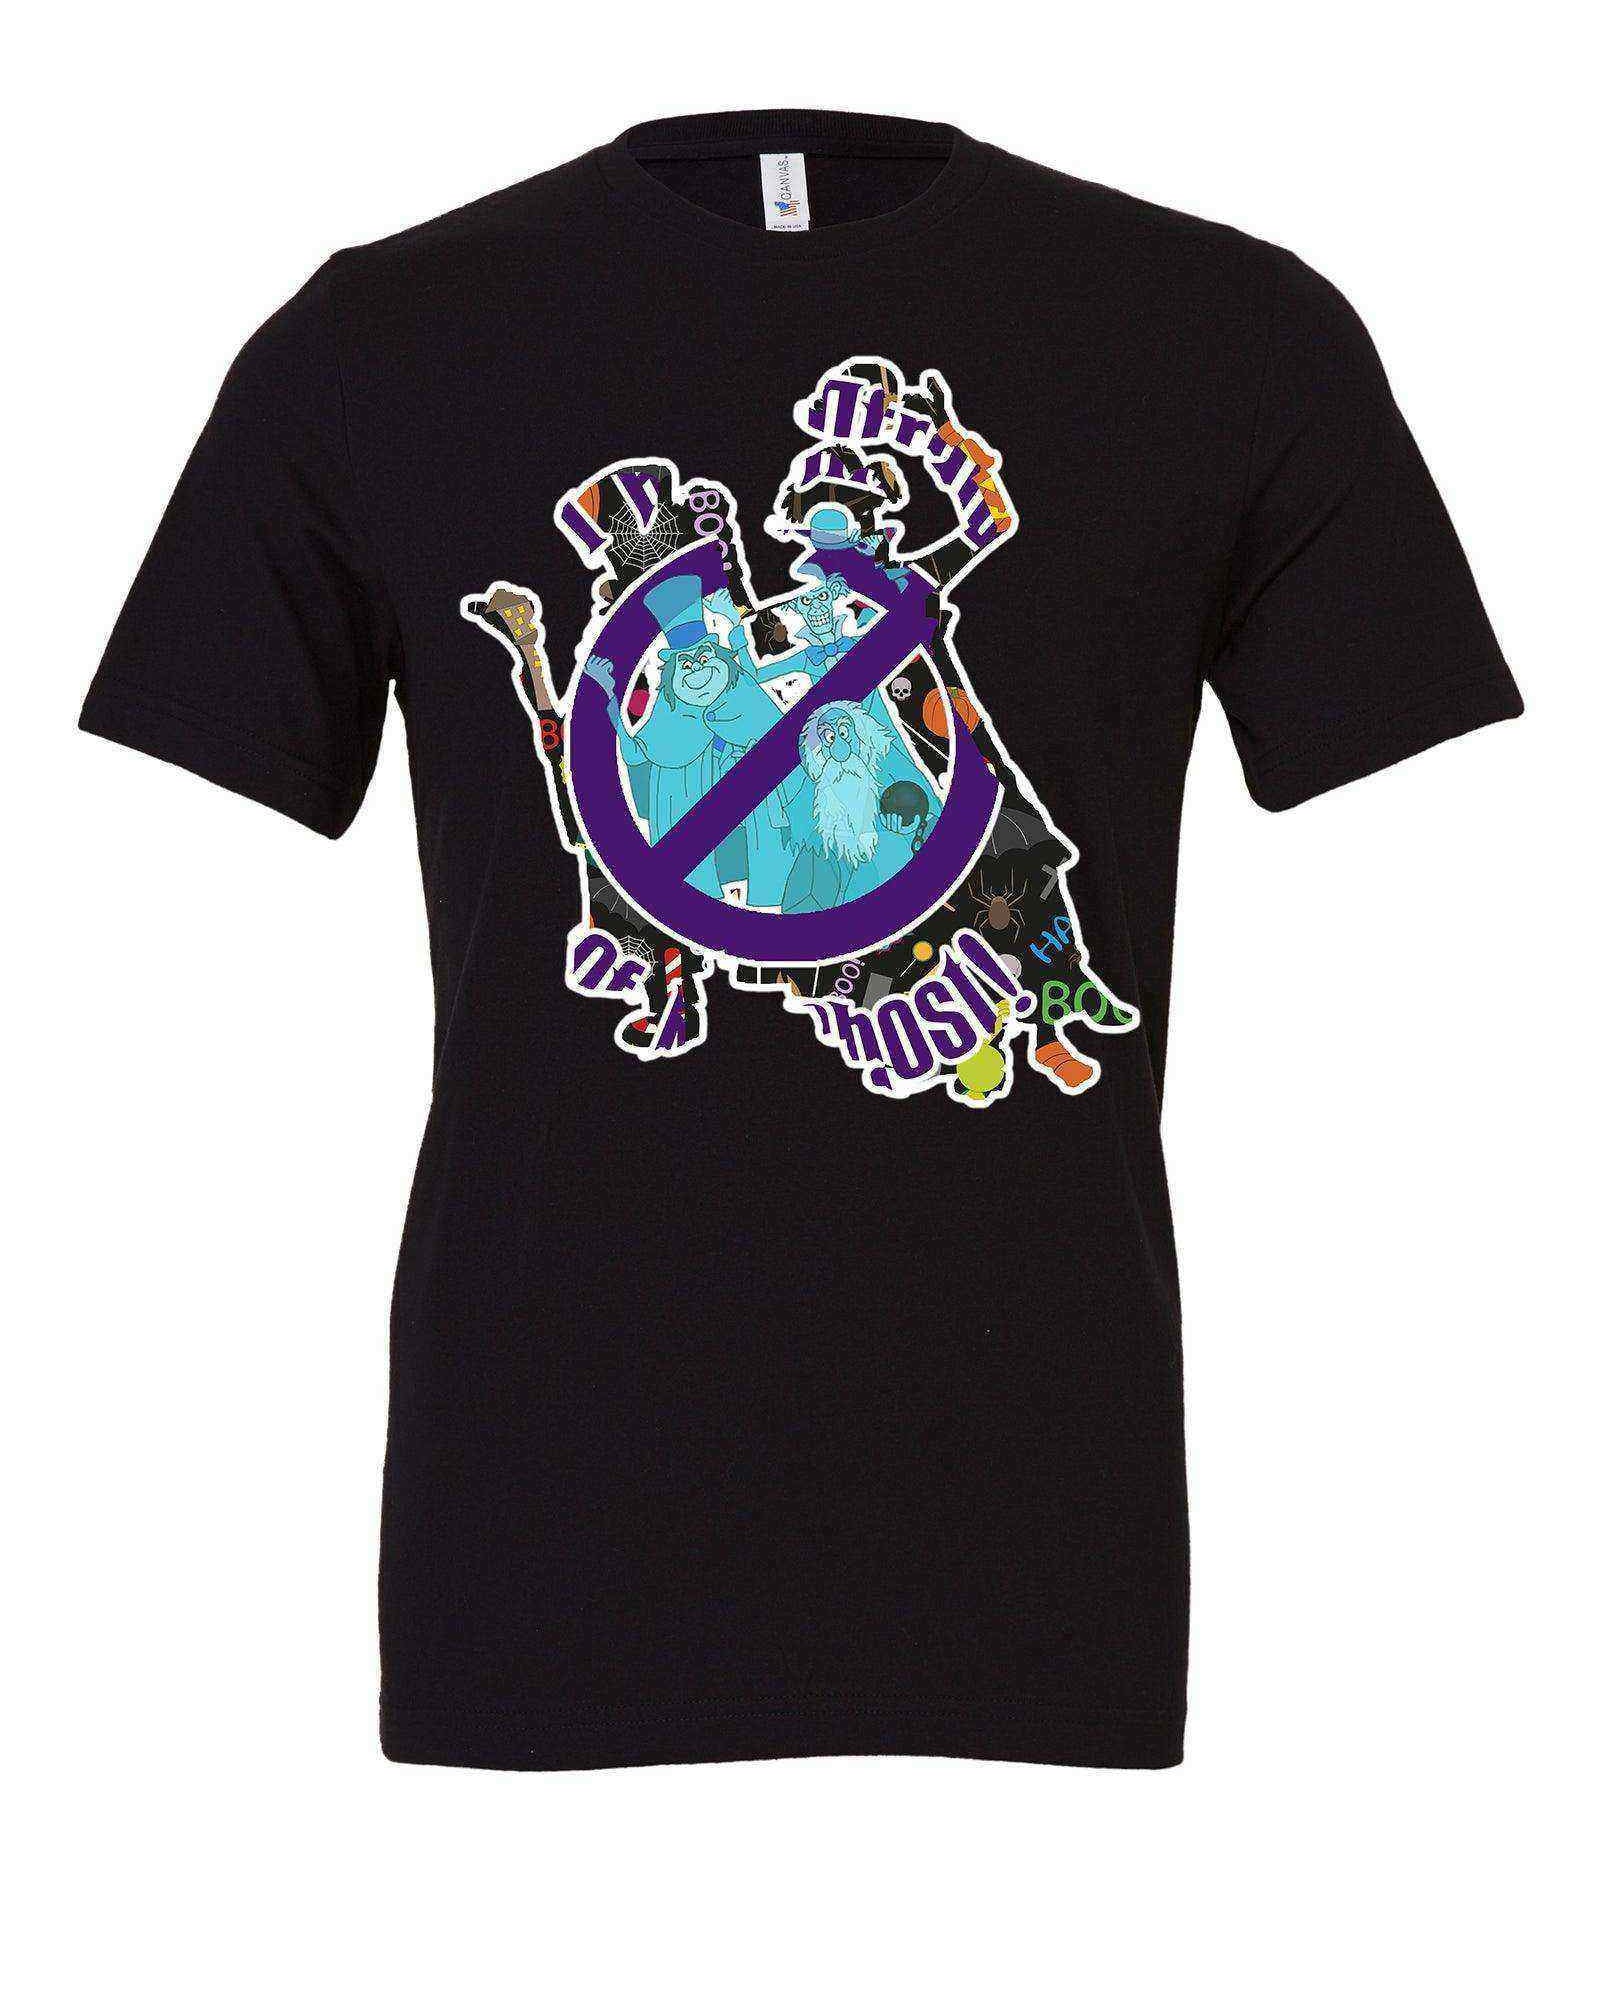 Toddler | Graffiti Haunted Mansion Ghostbusters Tee - Dylan's Tees